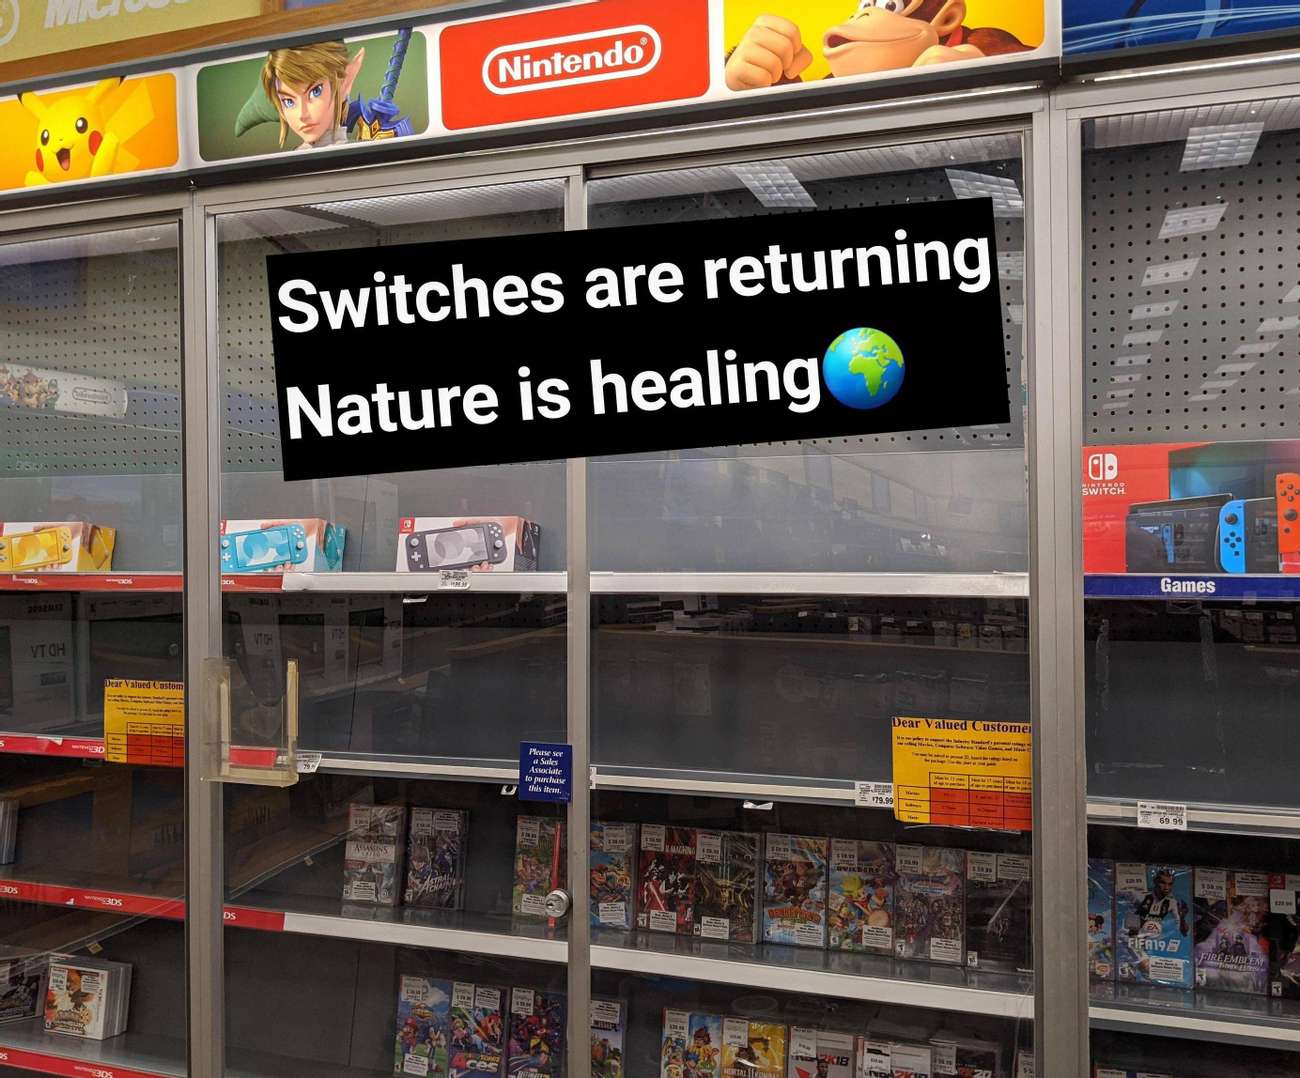 convenience store - Nintendo Switches are returning Nature is healing Od Switch Games Vtch Dear Sedostum Dear Valued Customei . Please se Sales Associate to pure this ifrat 179.99 Videns Ds FIFA198 Reember Cib